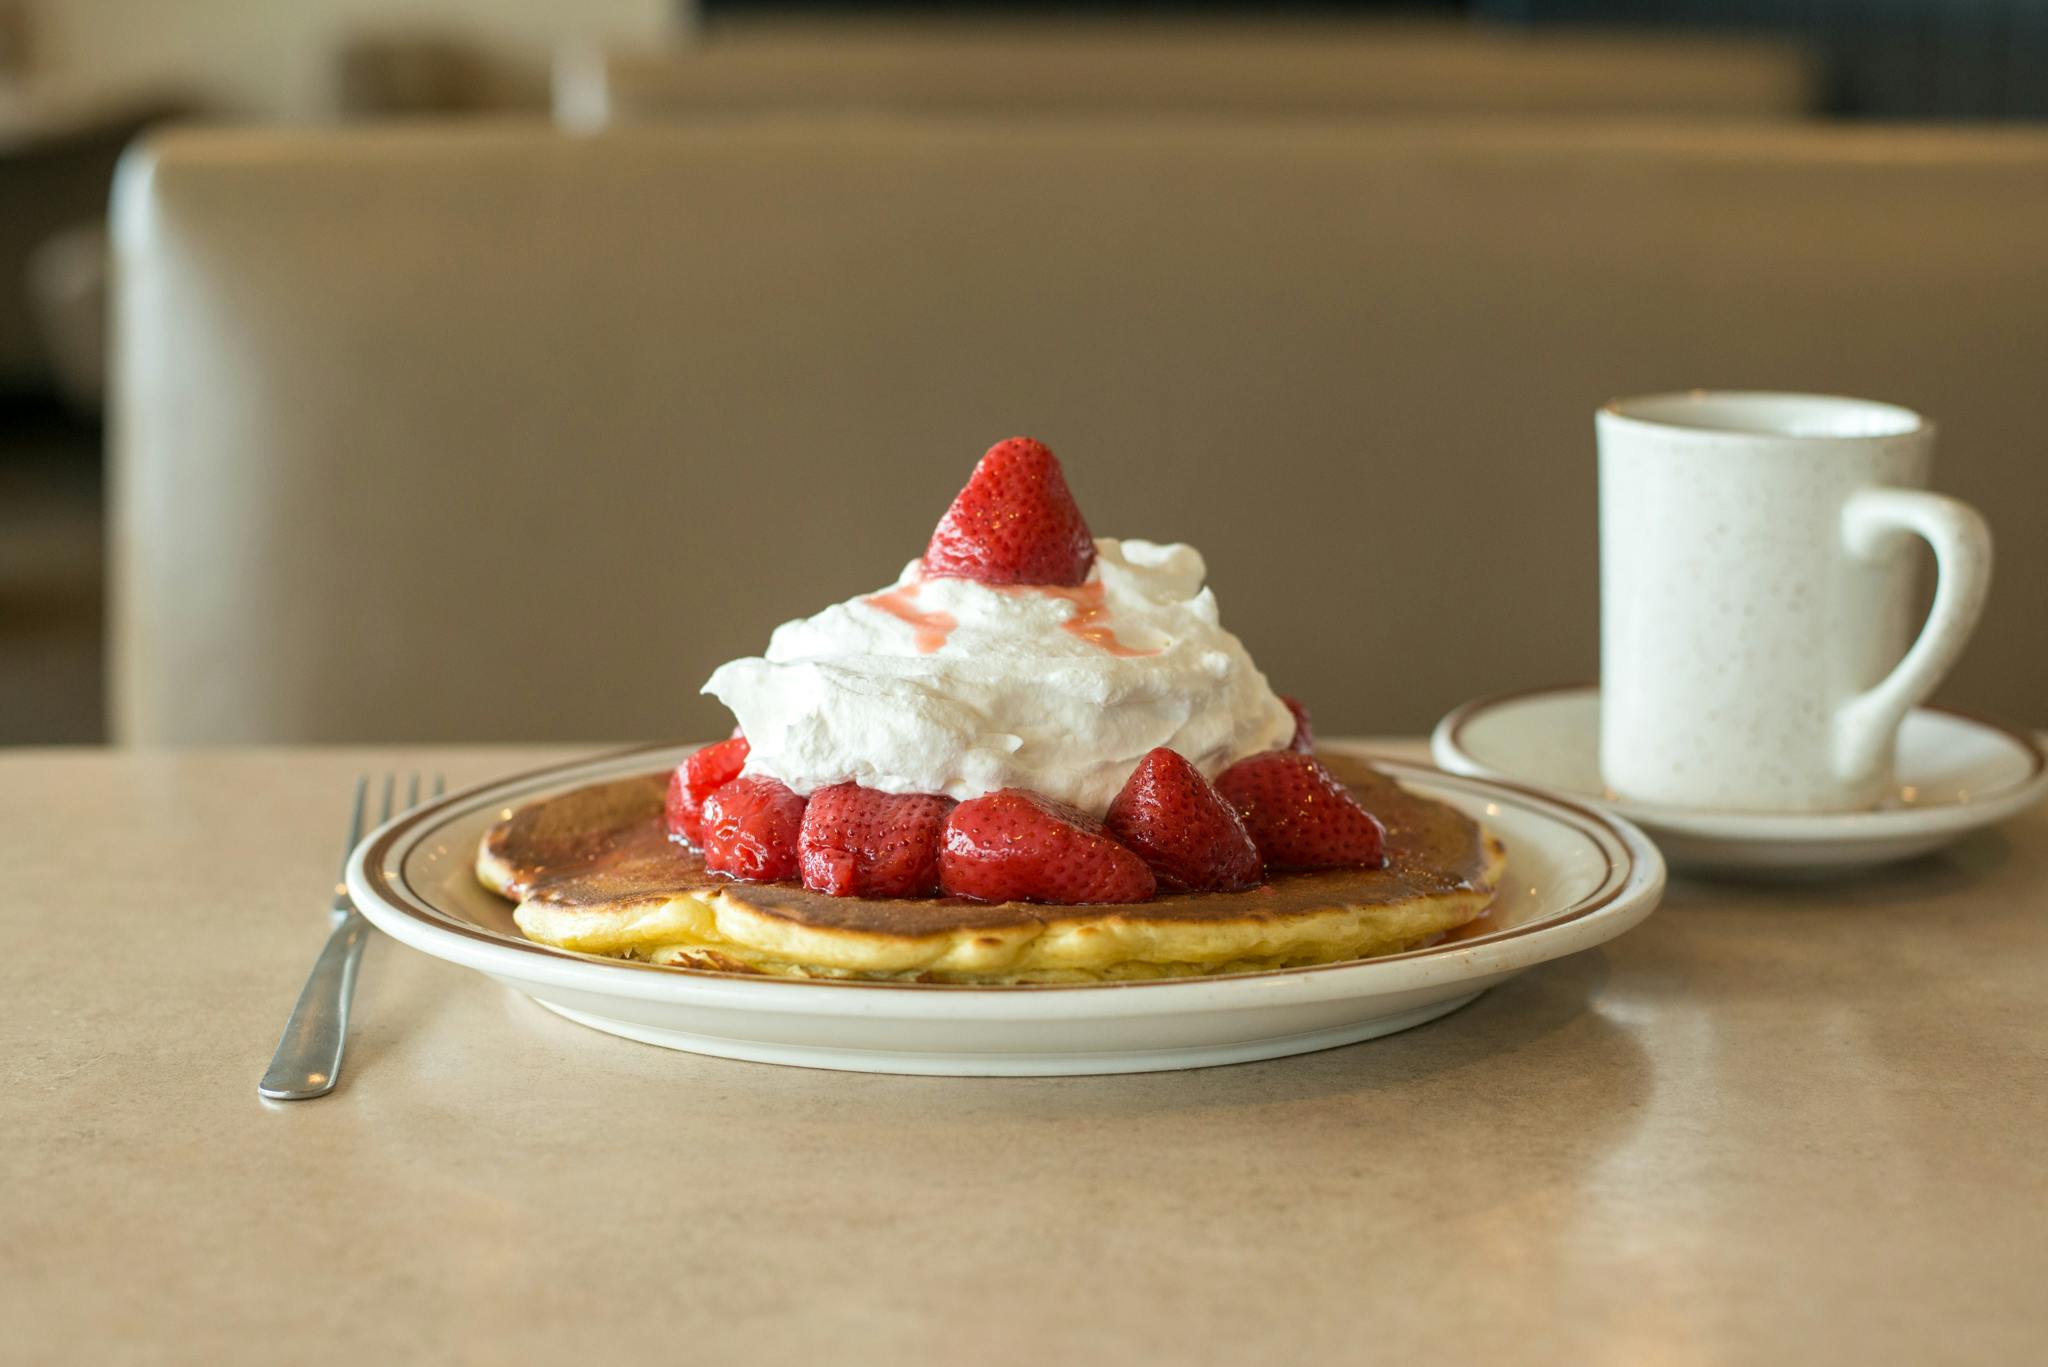 Strawberry Special Pancakes from The Pancake Place in Green Bay, WI